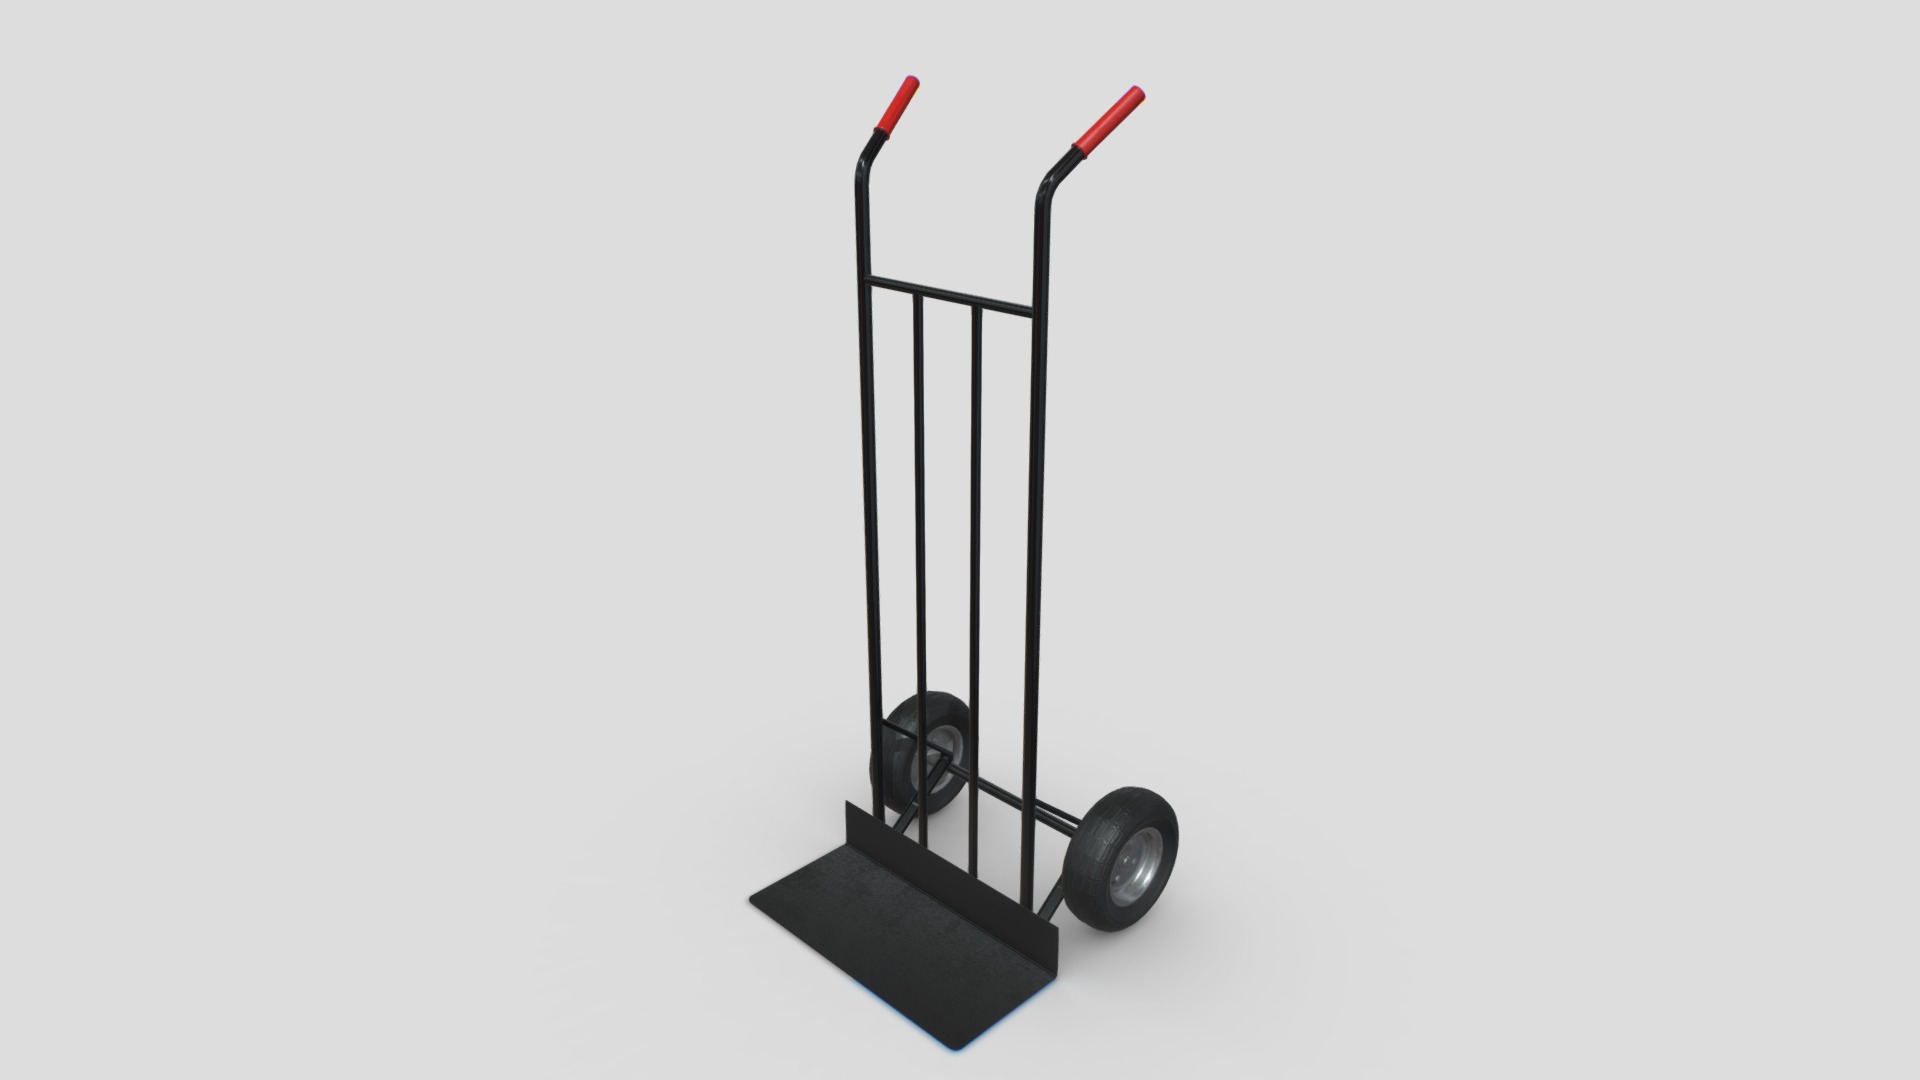 3D model Industrial Hand Trolley 4 - This is a 3D model of the Industrial Hand Trolley 4. The 3D model is about a black and silver exercise equipment.